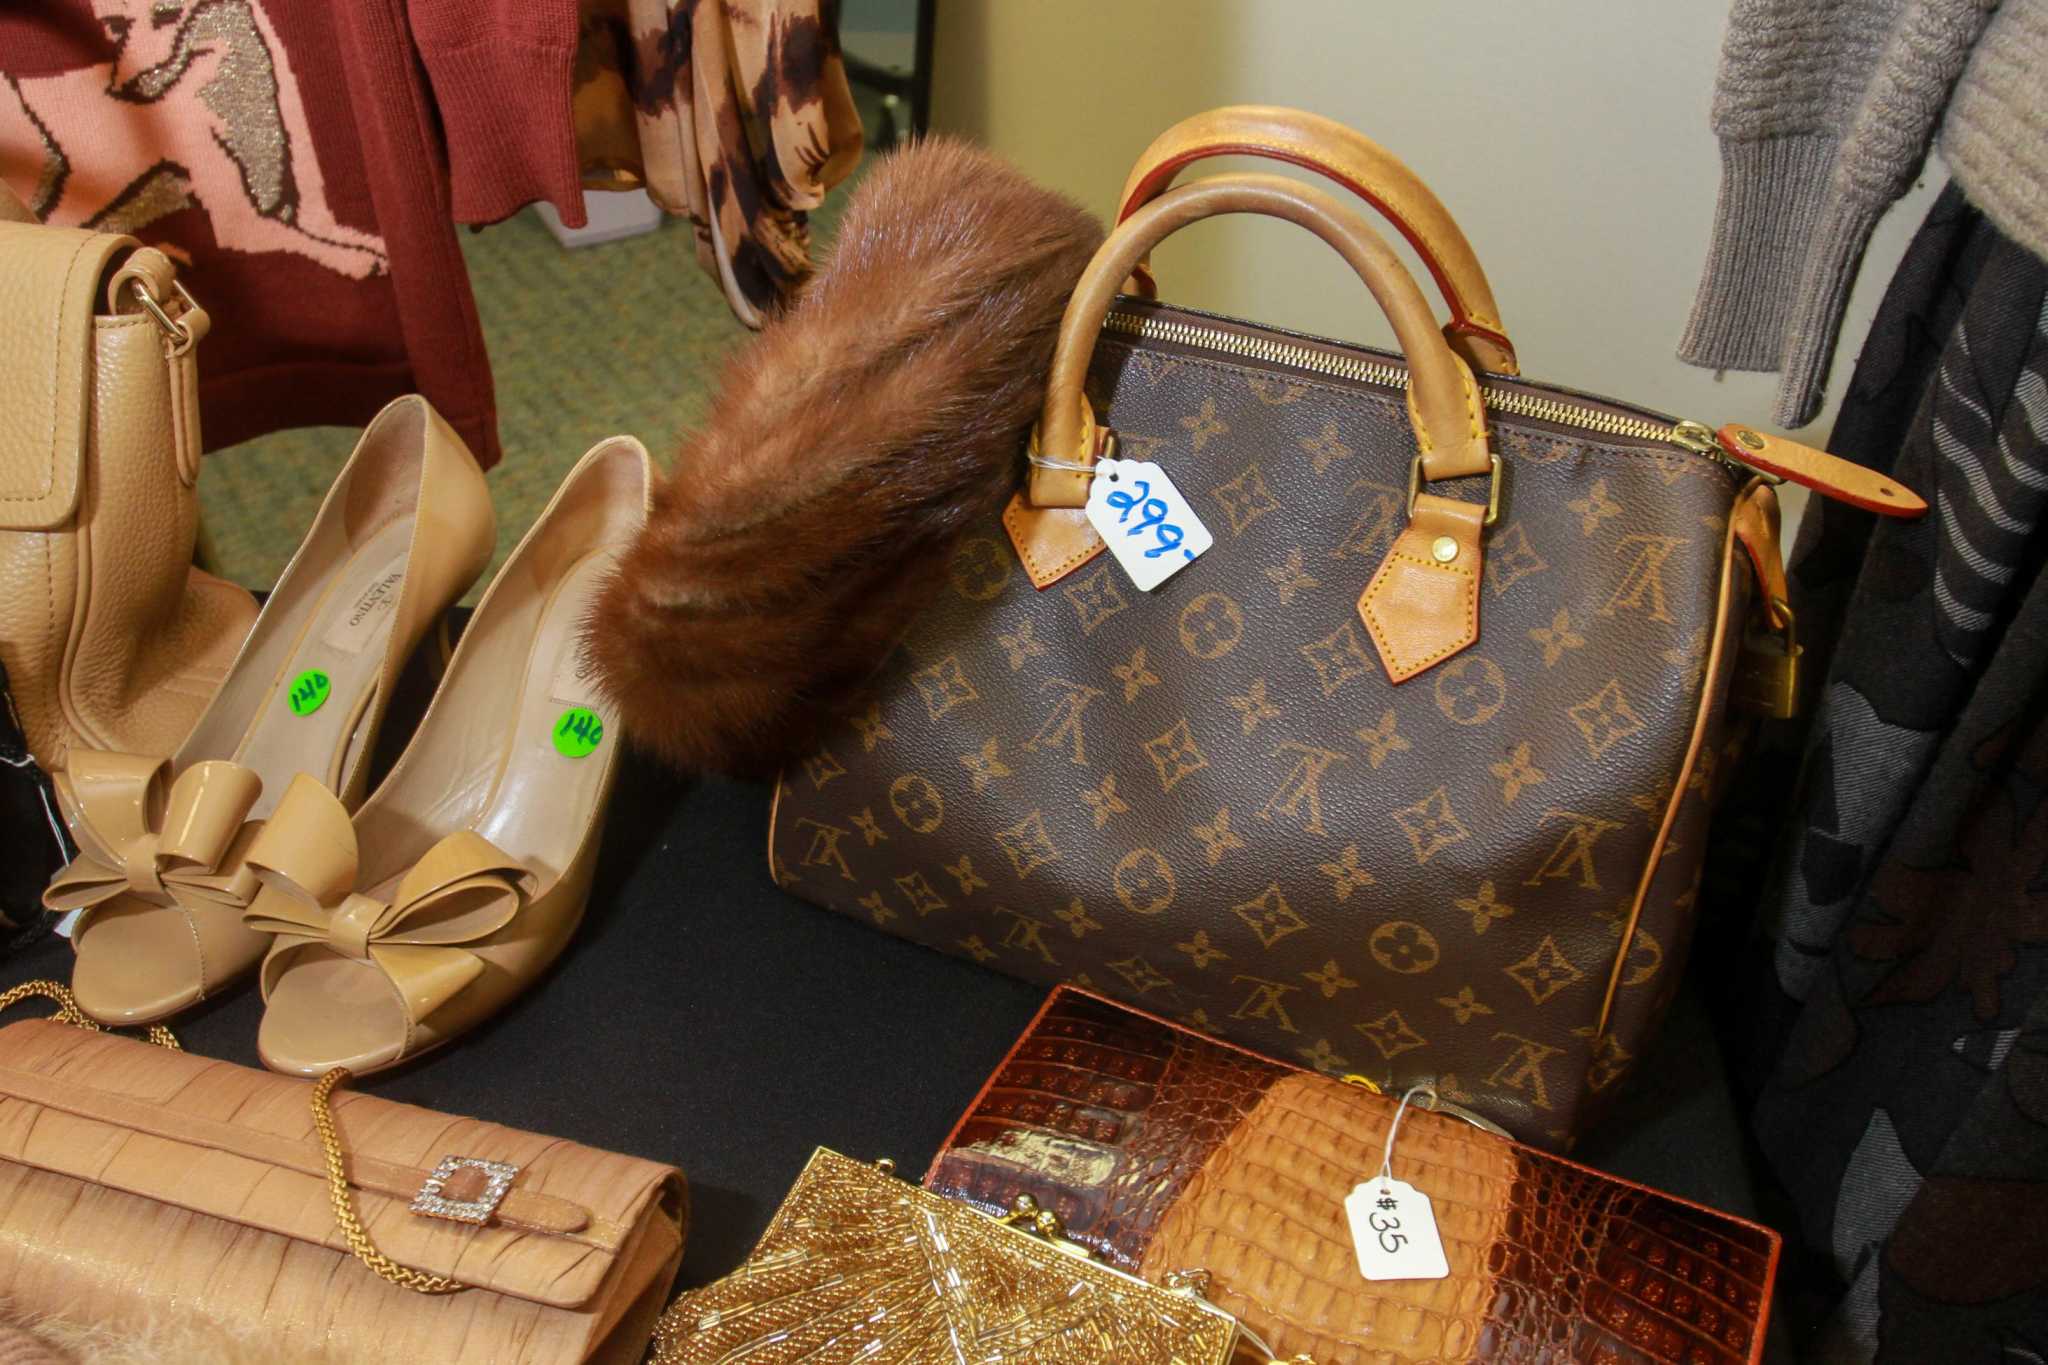 Vintage Chanel, Gucci and Burberry for sale at Salvation Army pop-up shop near Memorial ...